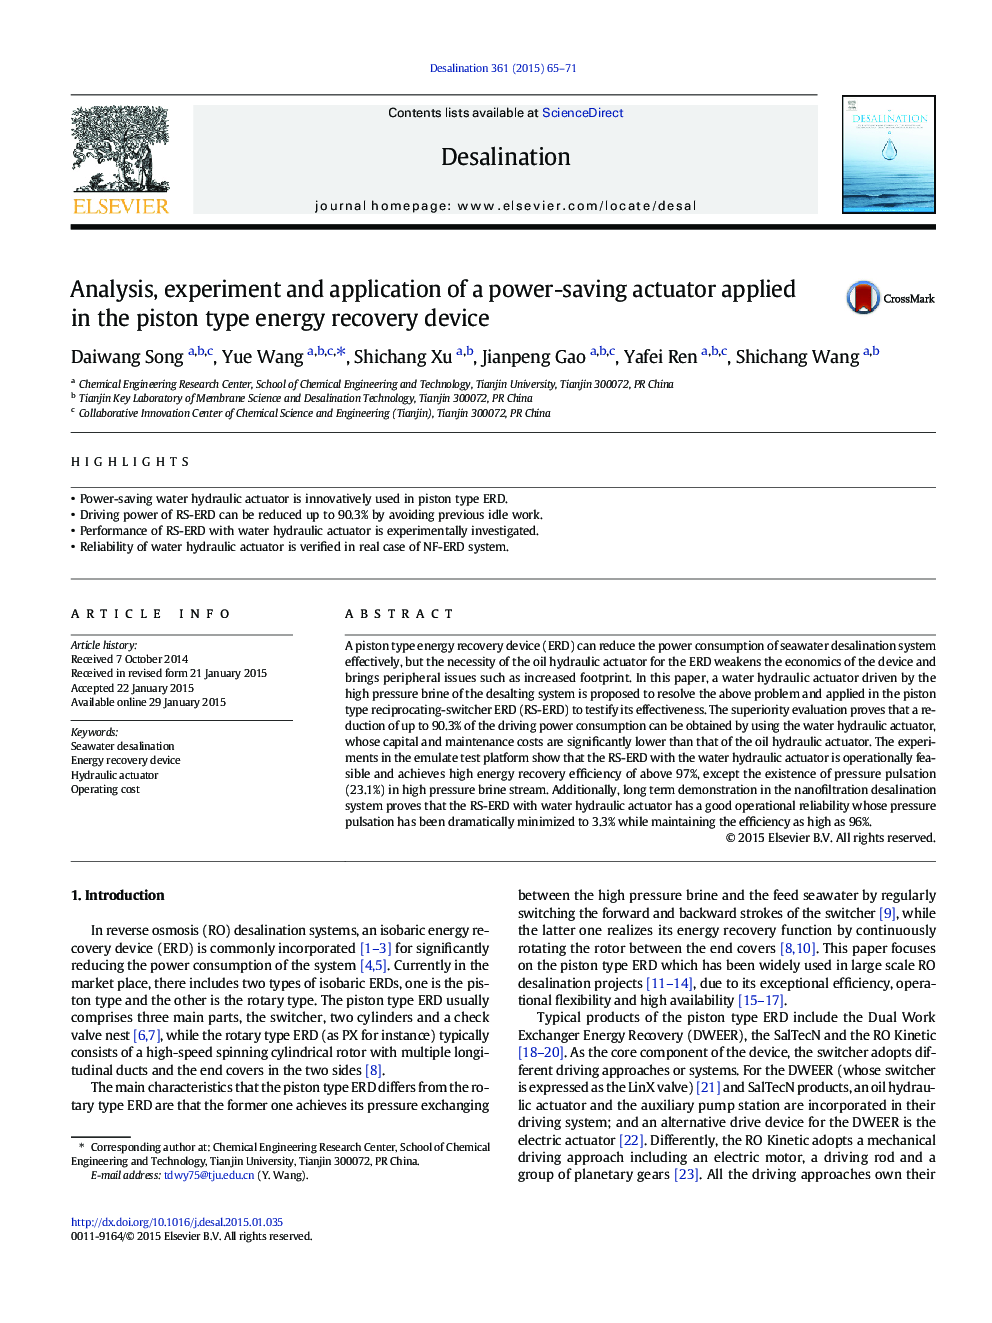 Analysis, experiment and application of a power-saving actuator applied in the piston type energy recovery device